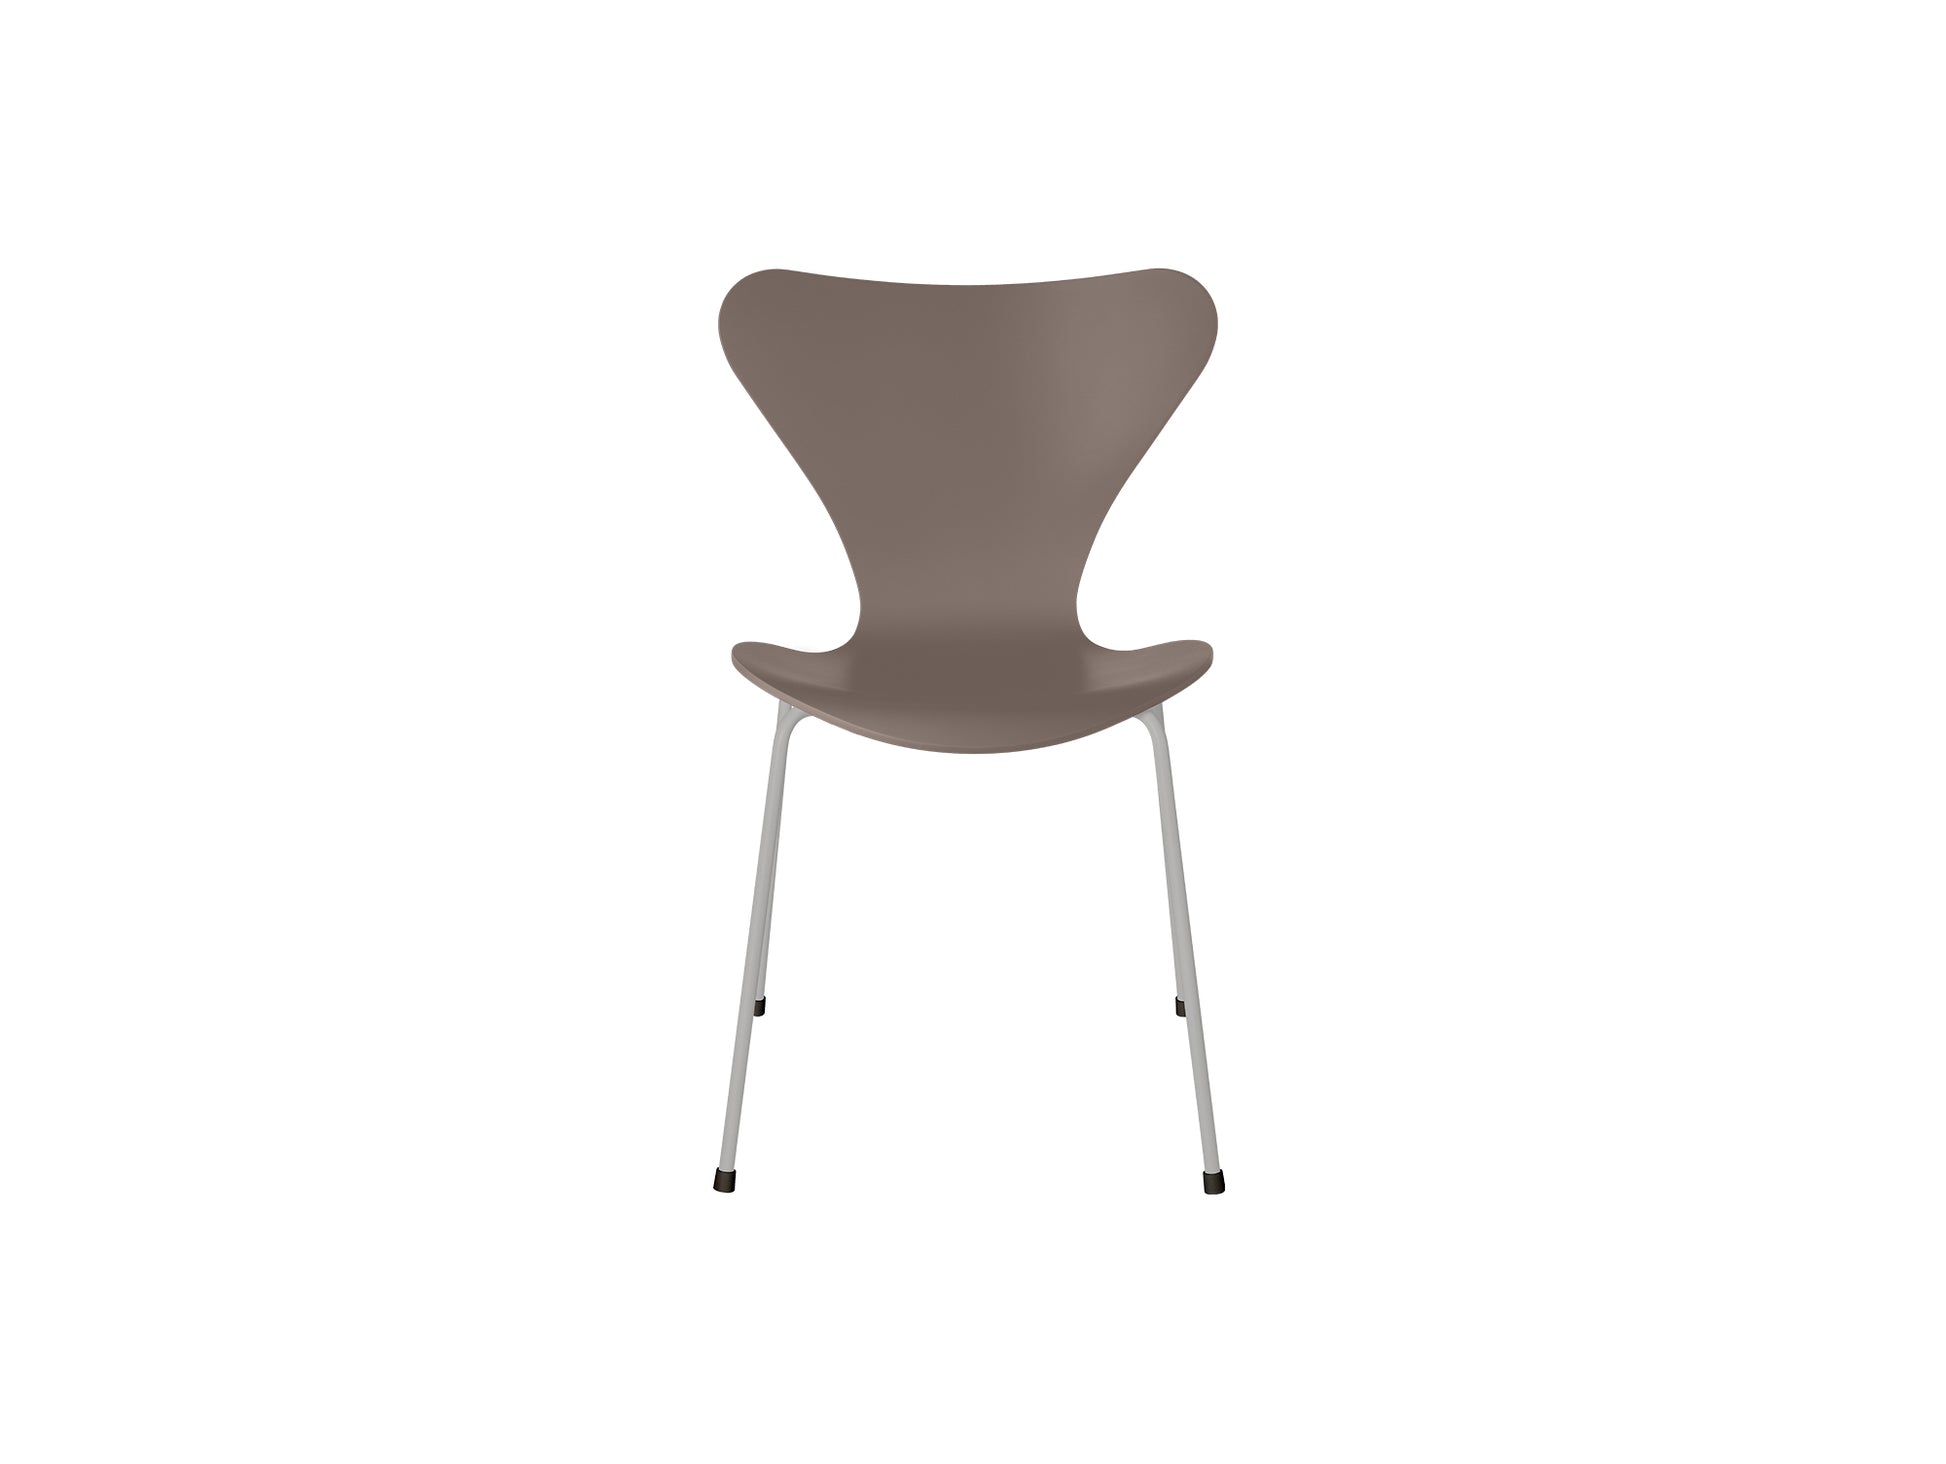 Series 7™ 3107 Dining Chair by Fritz Hansen - Deep Clay Lacquered Veneer Shell / Nine Grey Steel